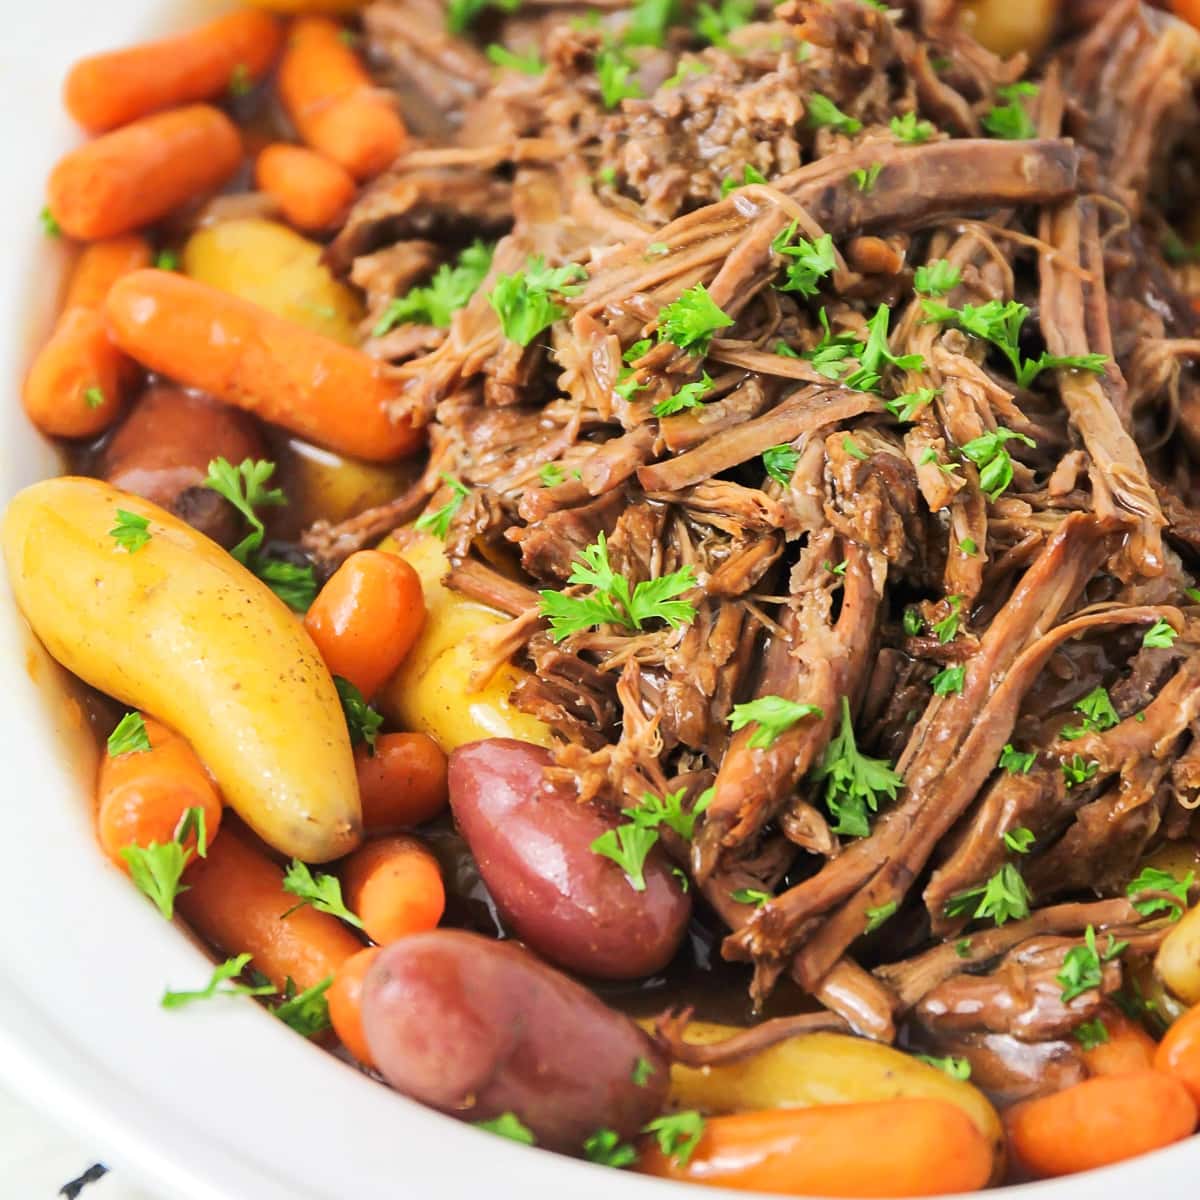 Close up of shredded meat, potatoes, and carrots in a white platter.